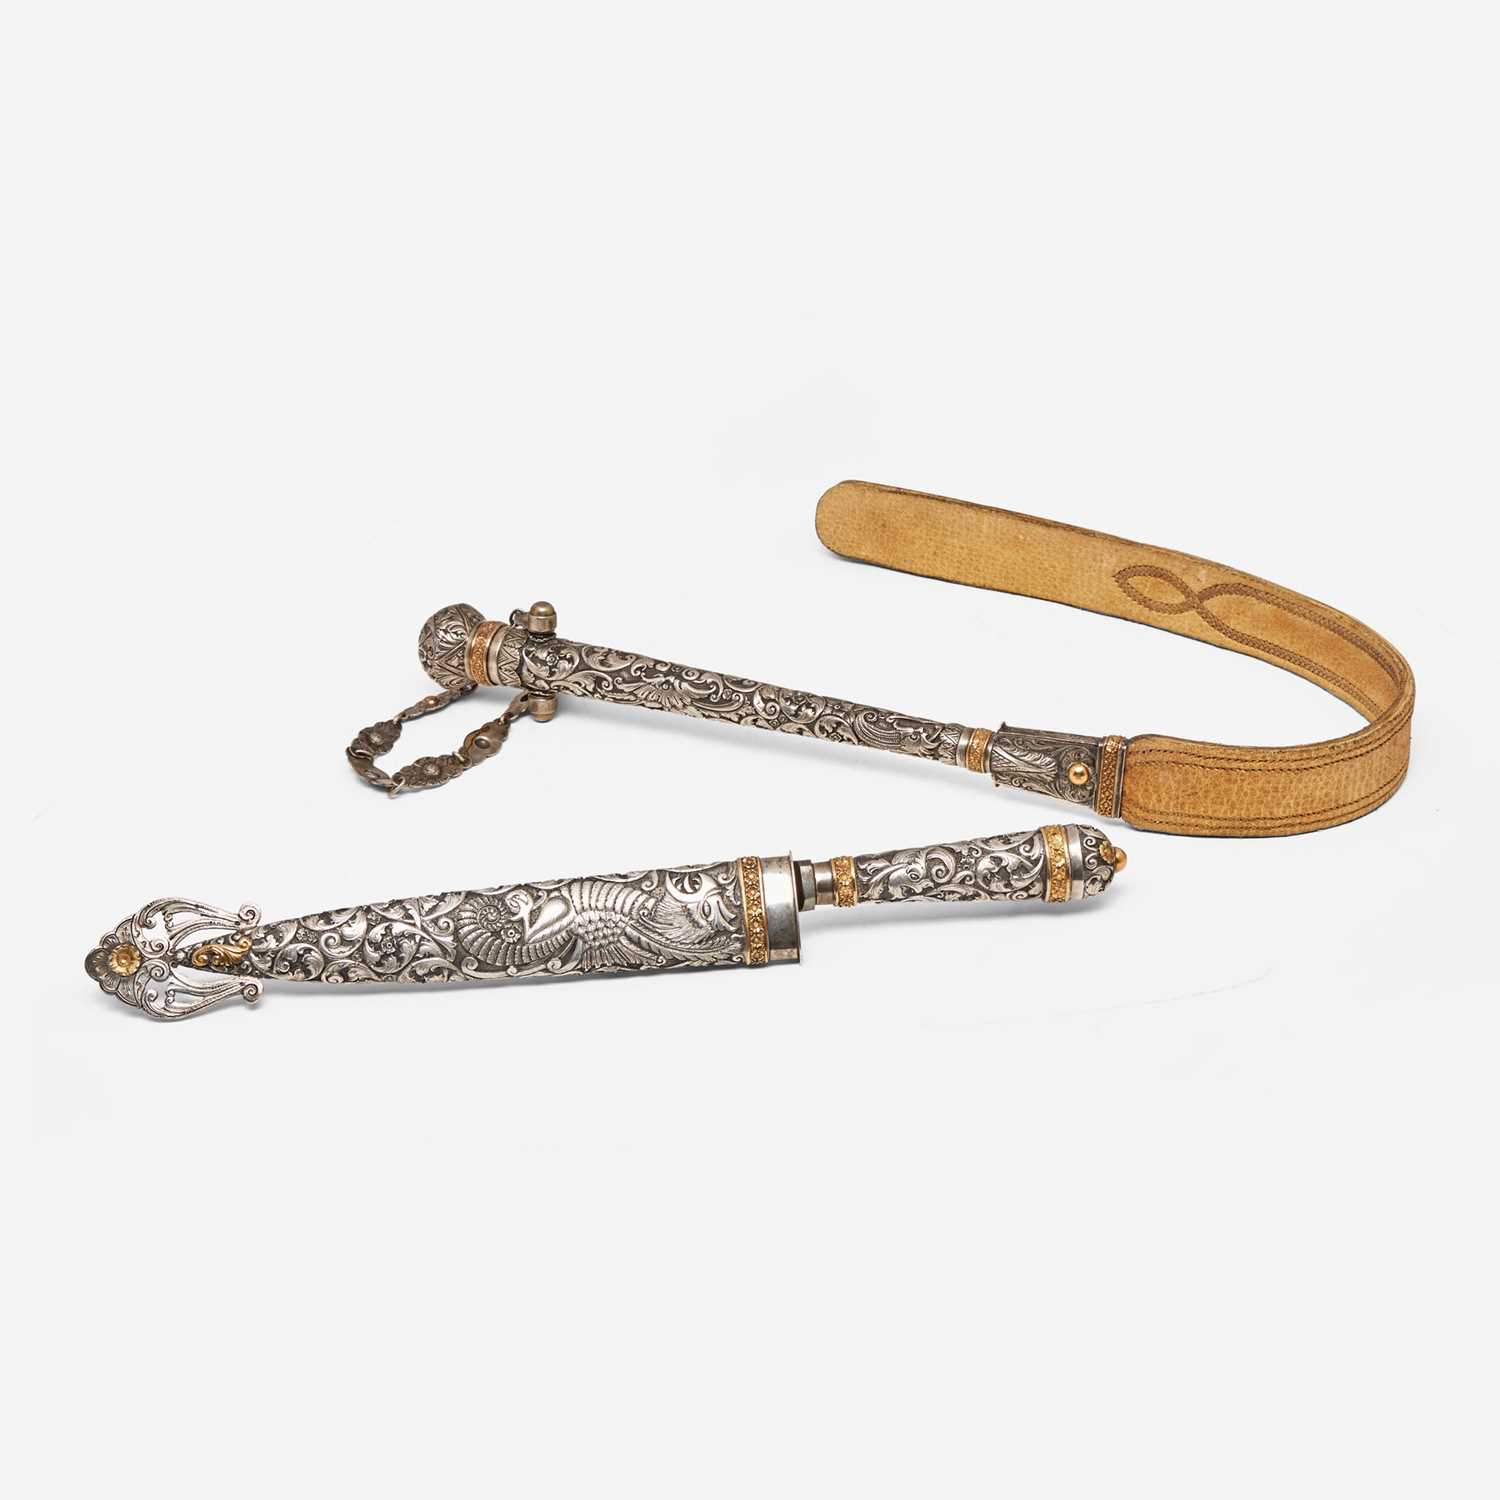 A repoussé silver and gold gaucho knife and flogger Heinrich Böker & Co. Arbolito S.A., Buenos